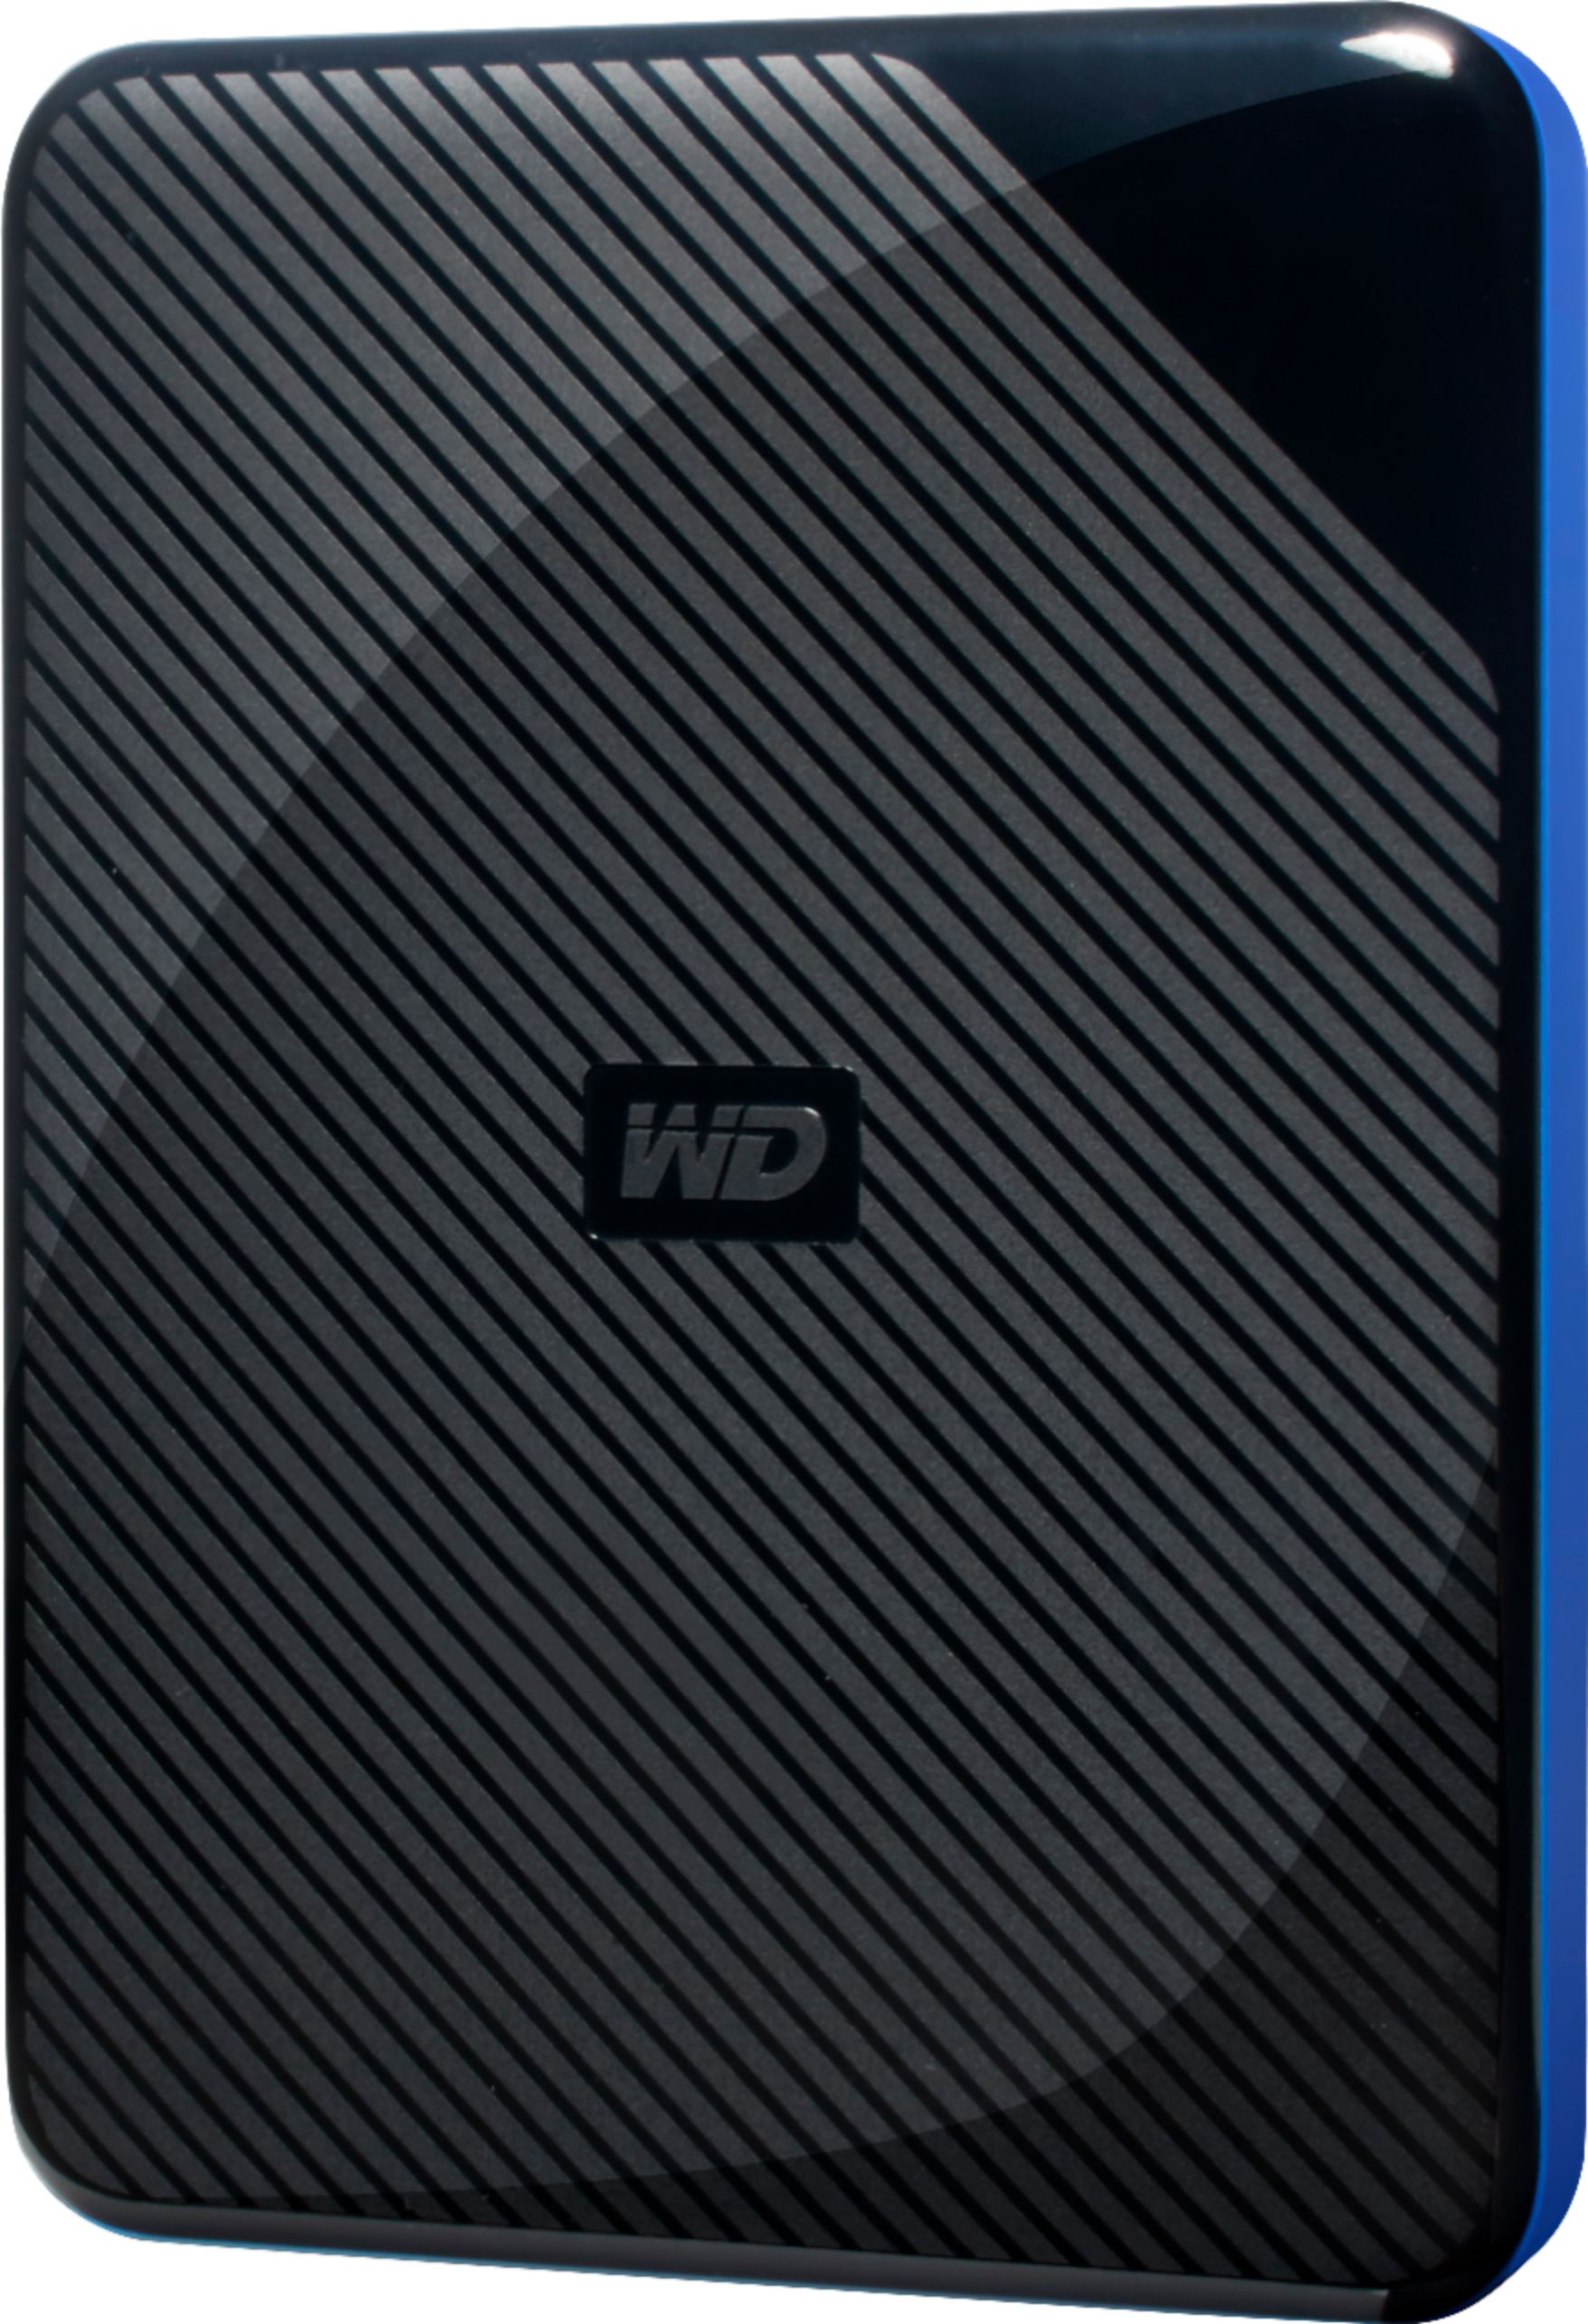 wd 2tb gaming drive works with playstation 4 portable external hard drive